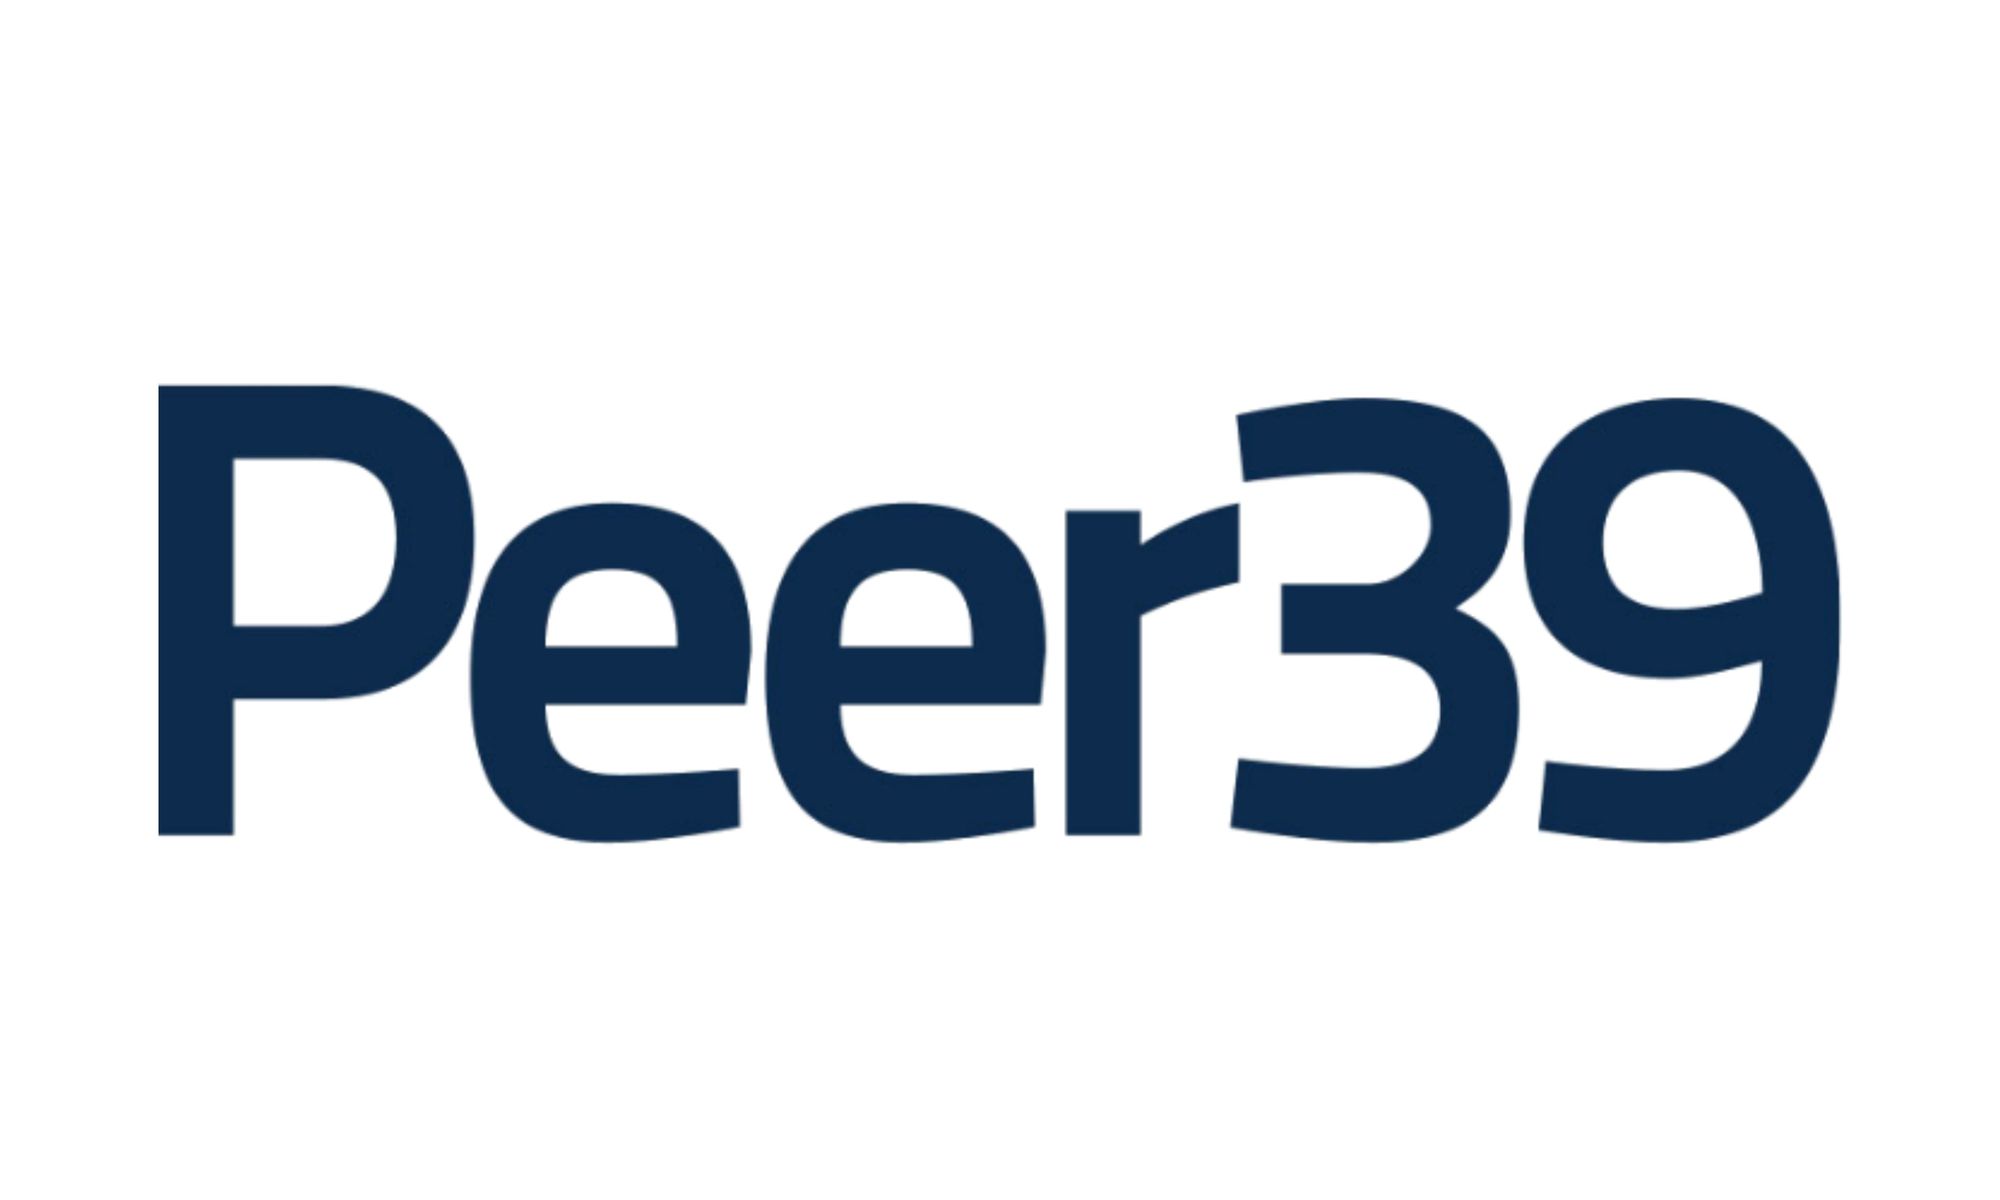 O3 Industries buys Peer39, the contextual targeting provider from Sizmek